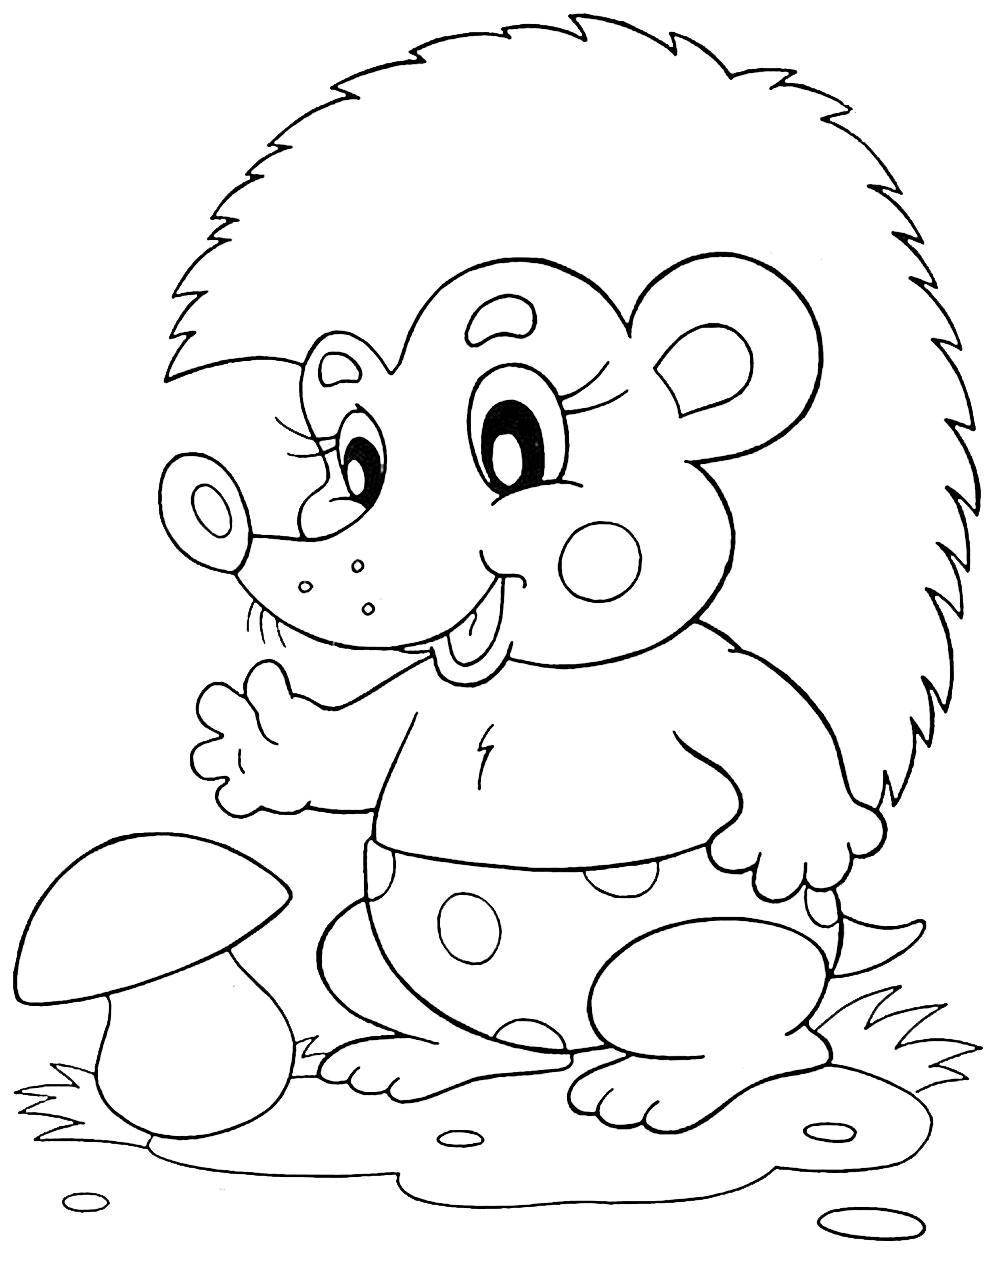 Coloring Hedgehog with a mushroom. Category Animals. Tags:  animals, hedgehog, mushroom.